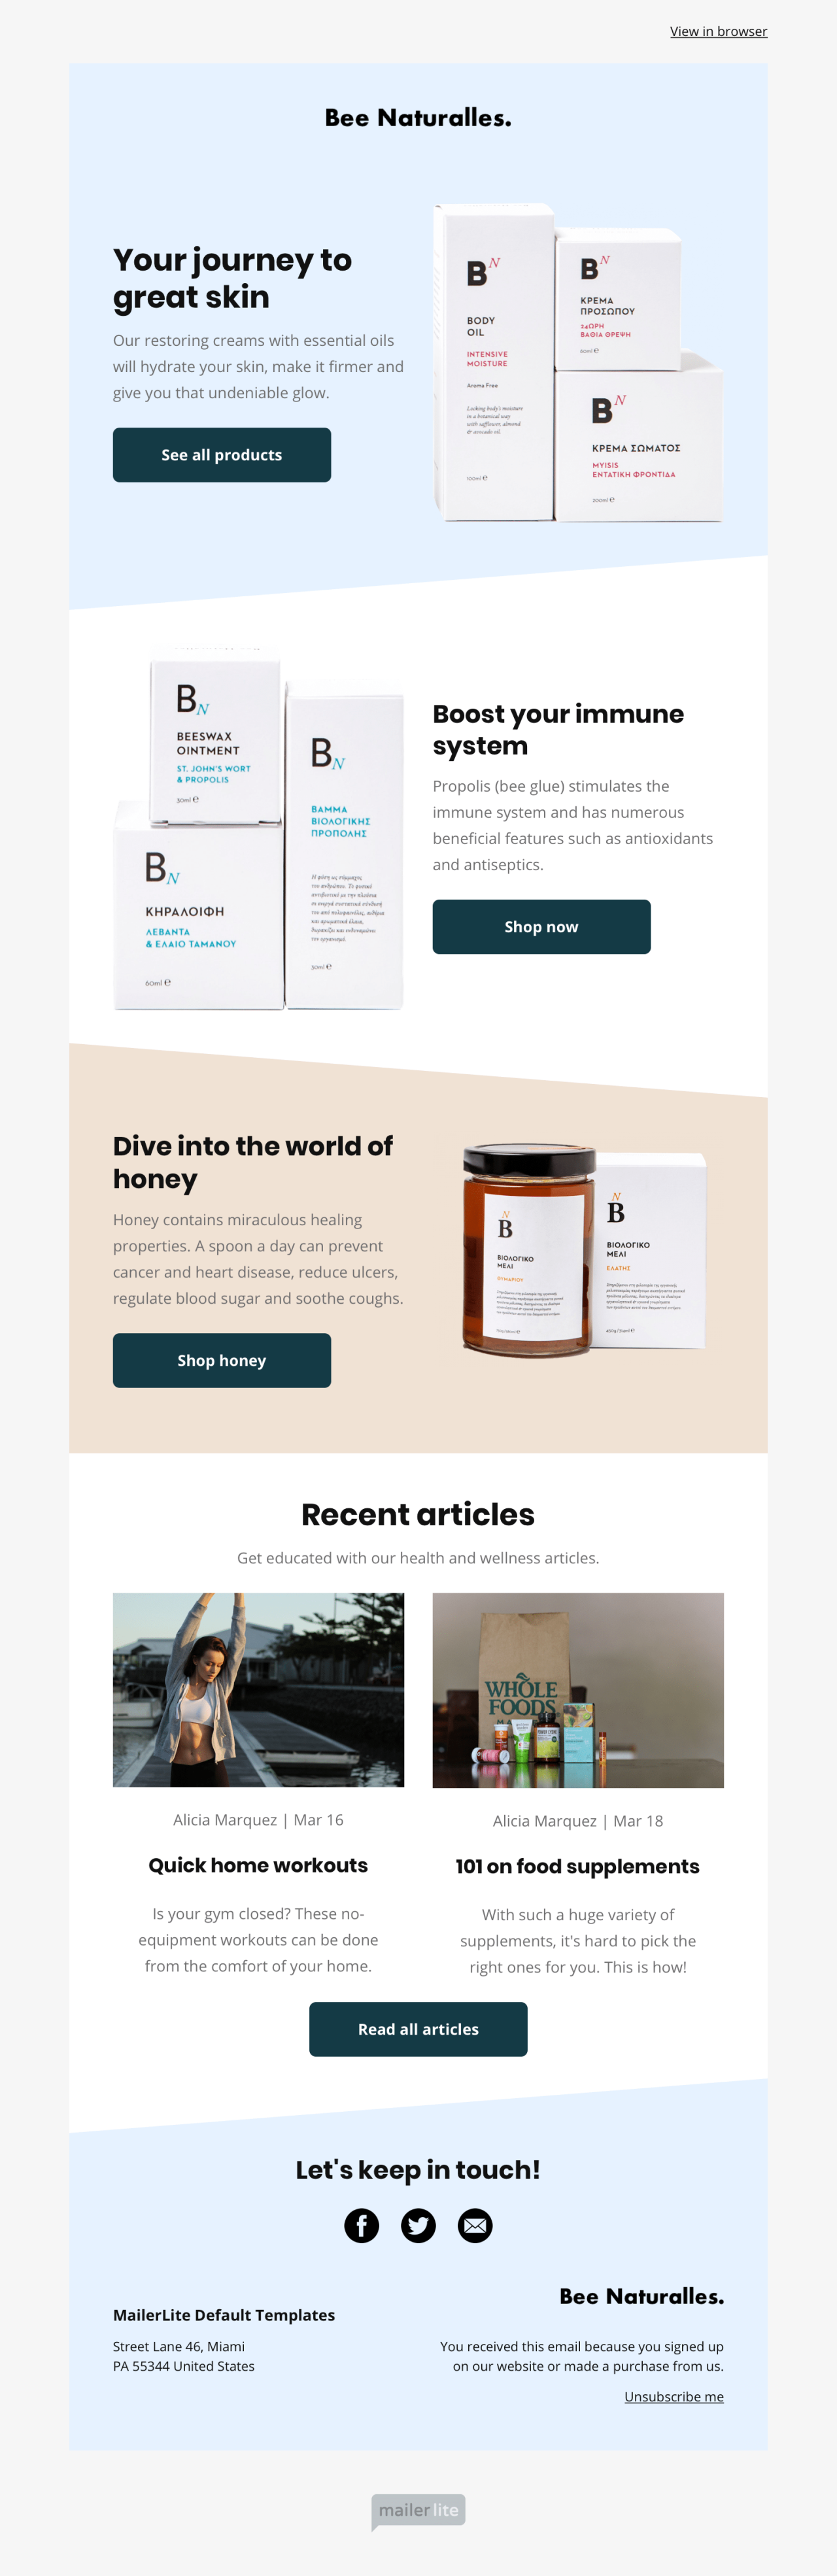 Body care & lifestyle template - Made by MailerLite